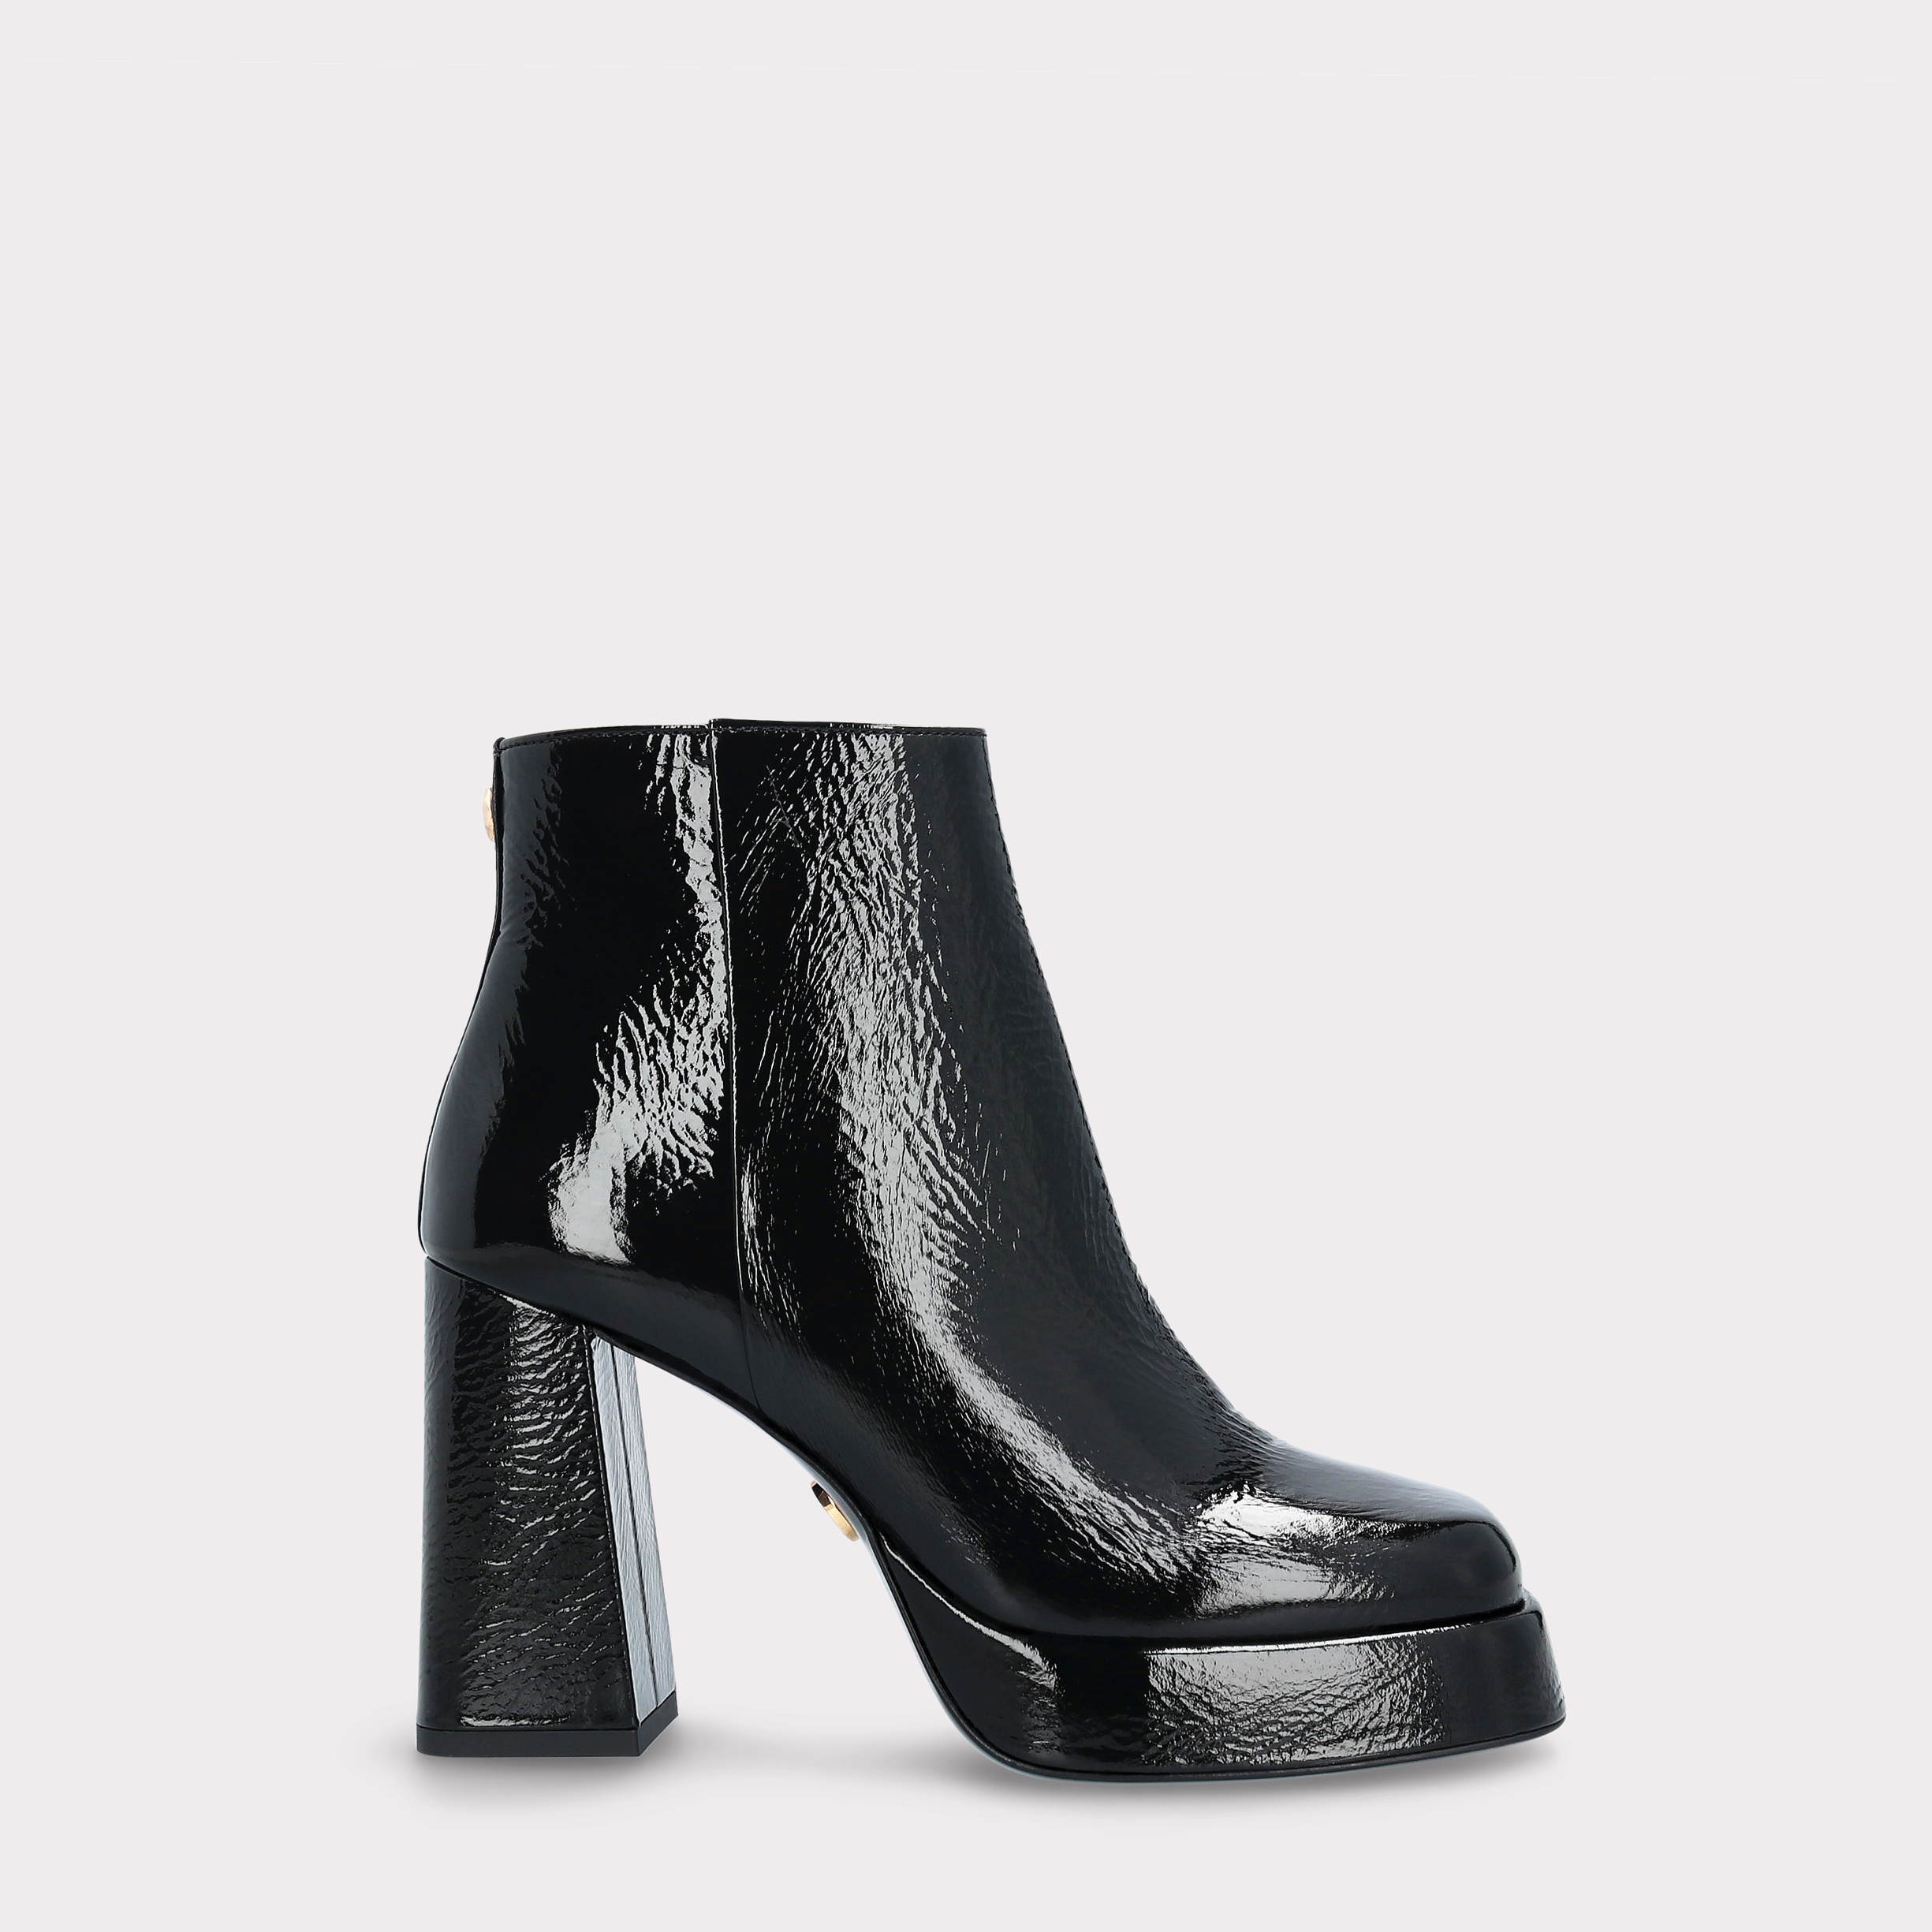 CINDY BLACK CRUSHED PATENT LEATHER PLATFORM ANKLE BOOTS